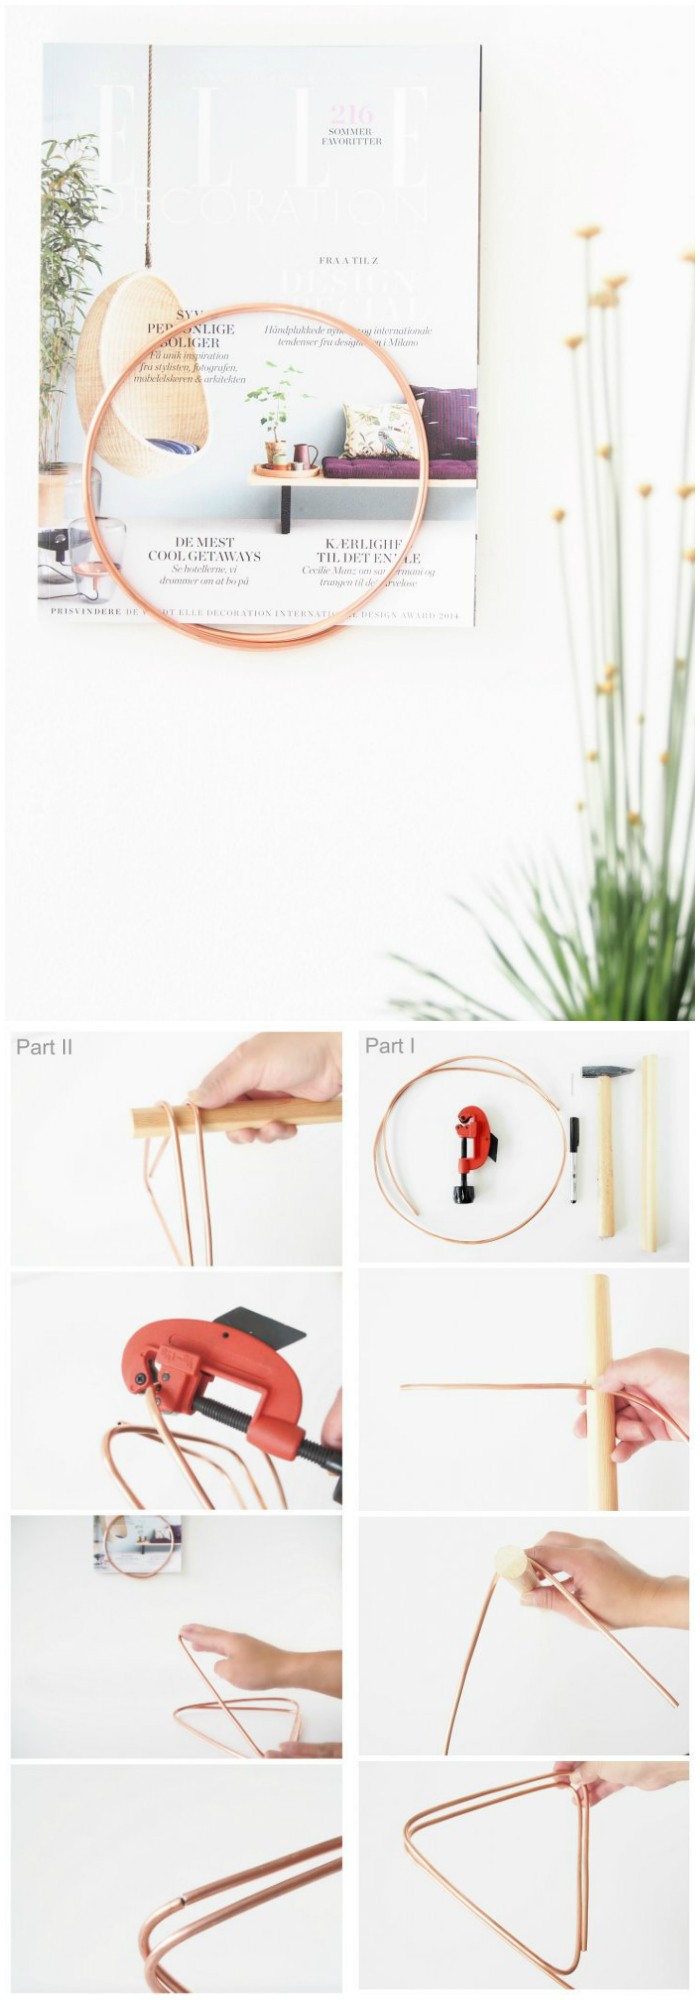 Ring Magazine Holder Cheap DIY Projects For Your Home Decoration